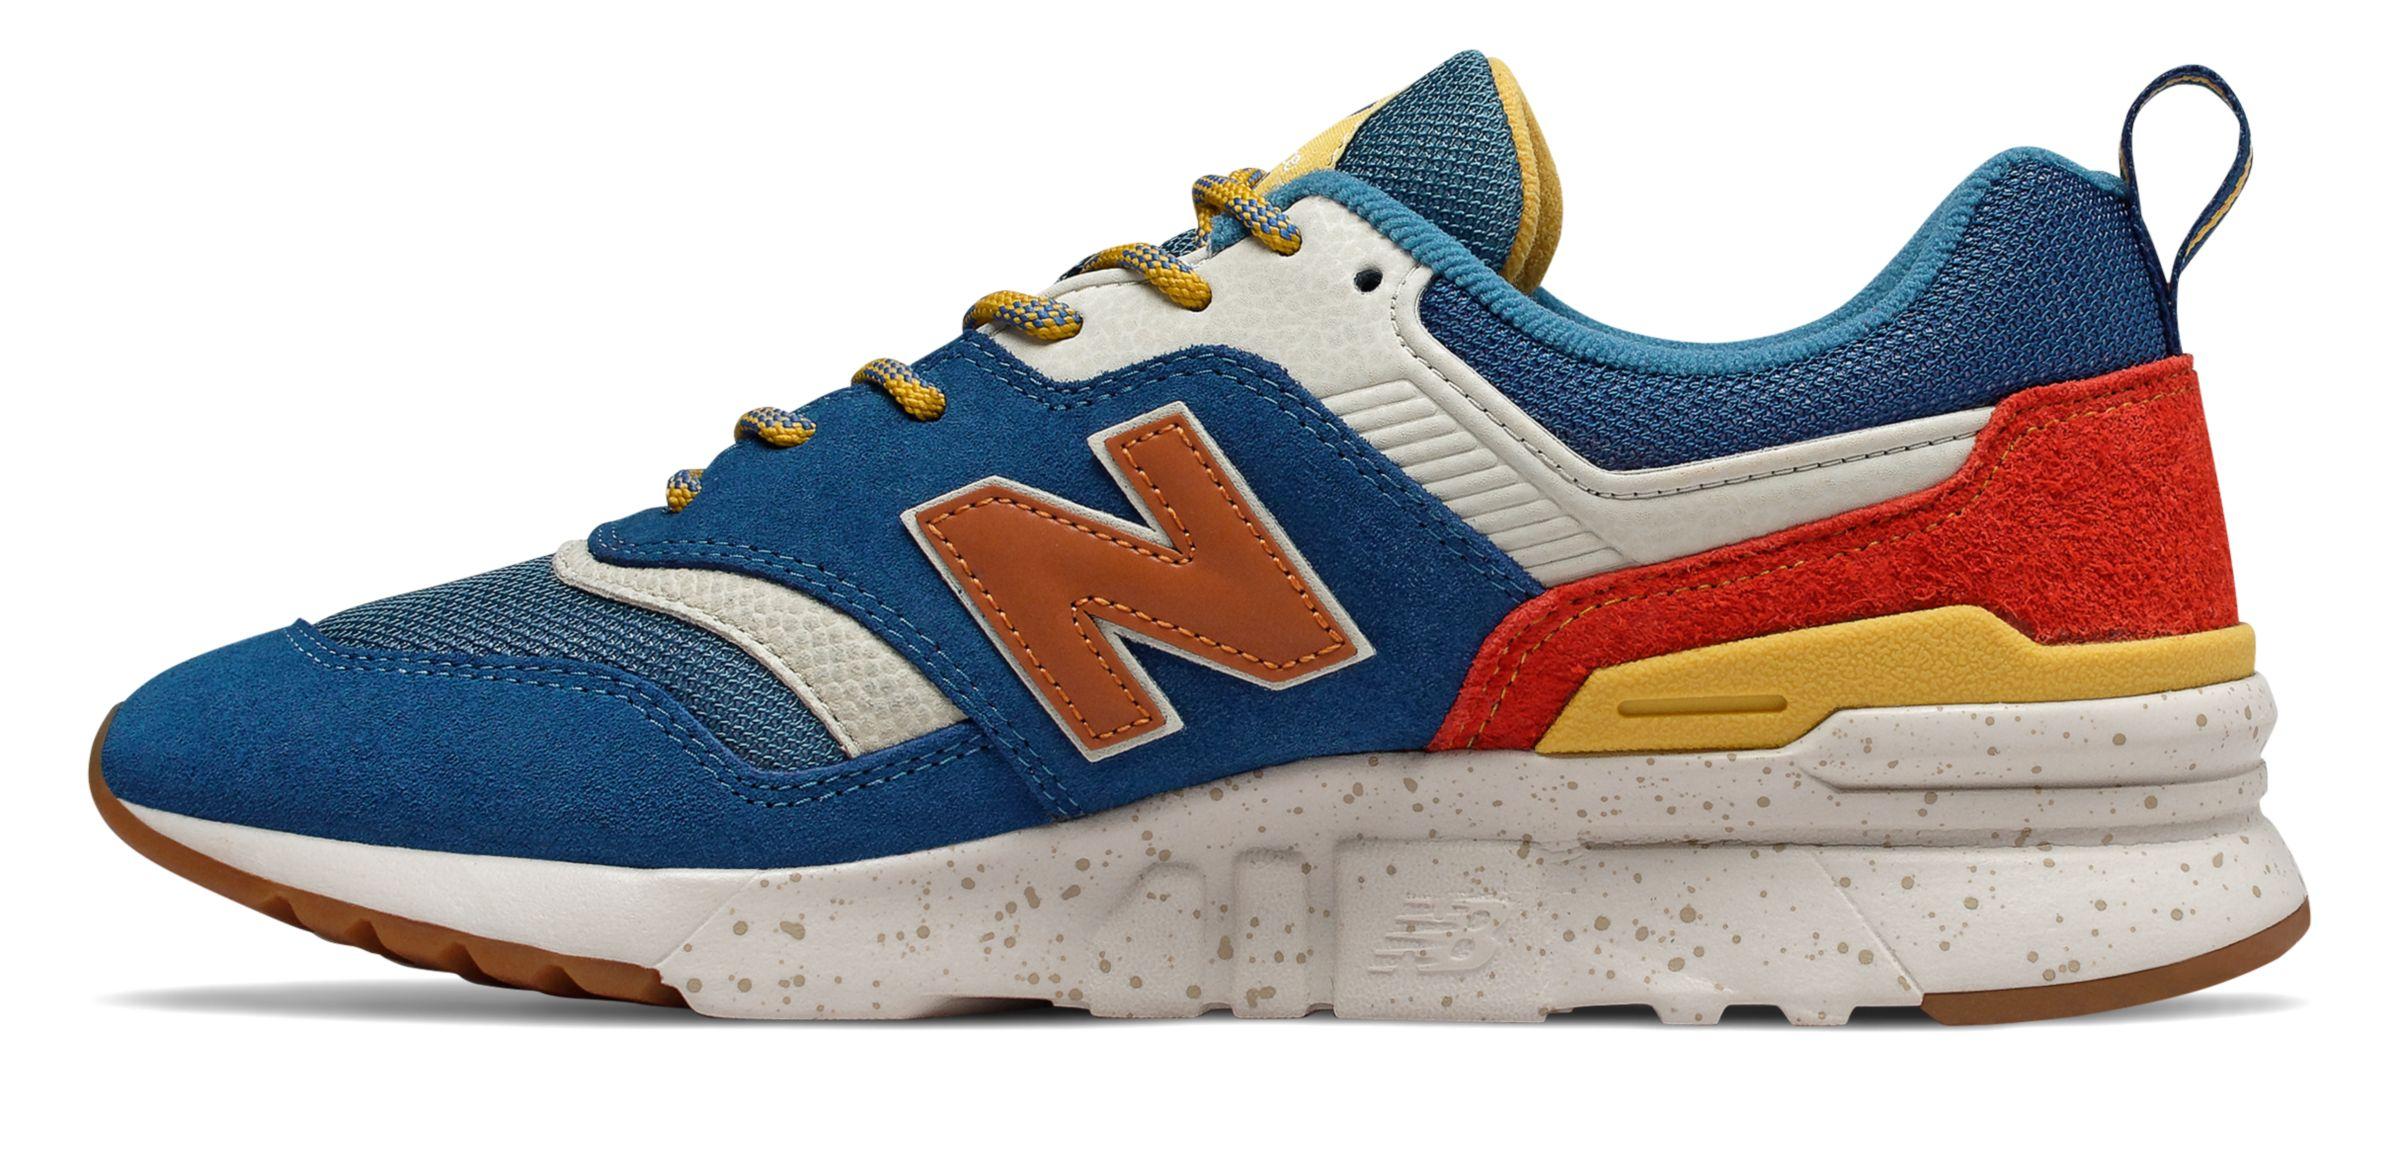 New Balance Rubber 997h Cordura in Blue for Men - Lyst